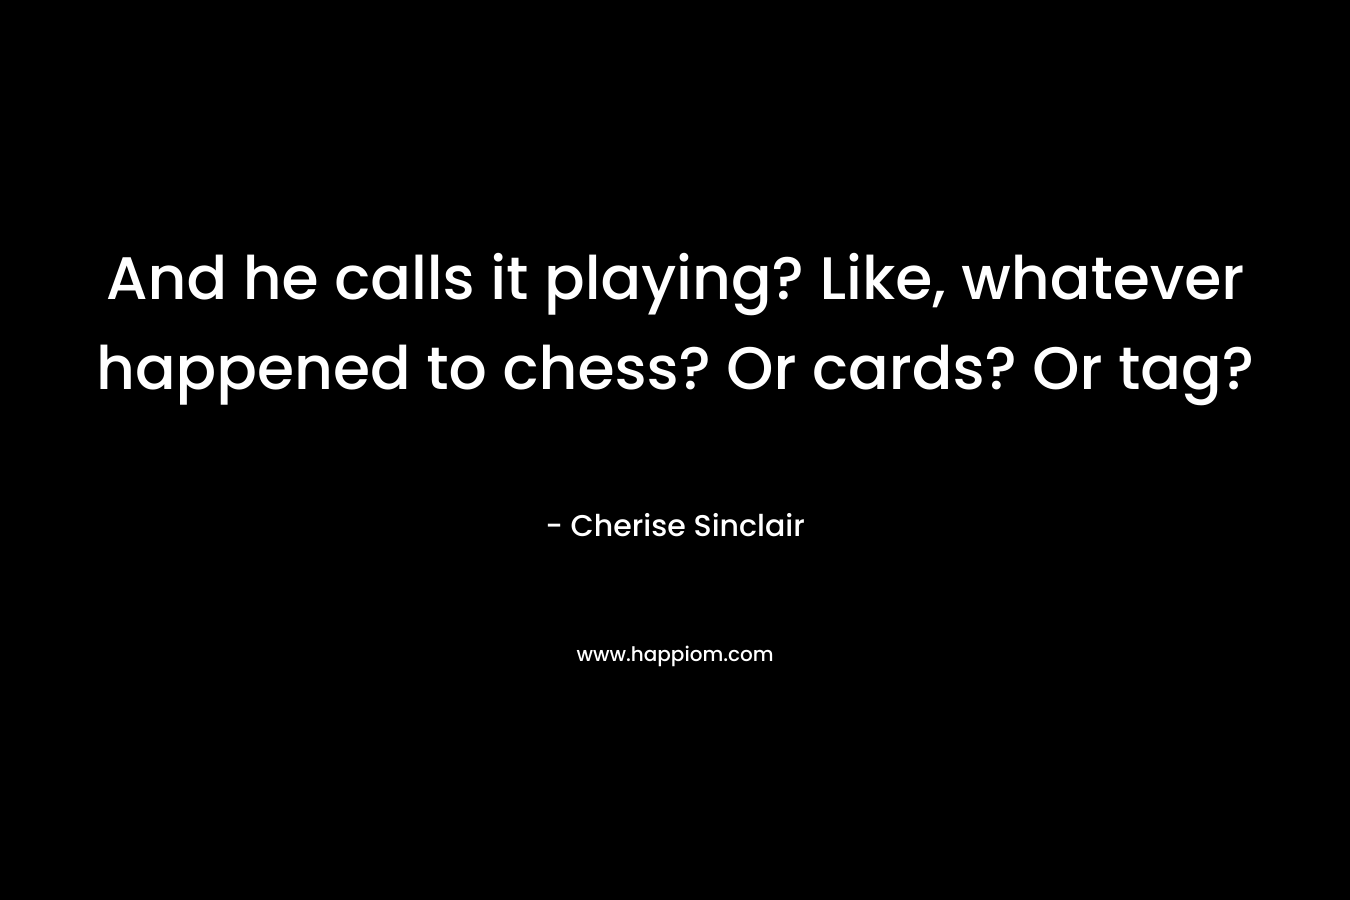 And he calls it playing? Like, whatever happened to chess? Or cards? Or tag? – Cherise Sinclair